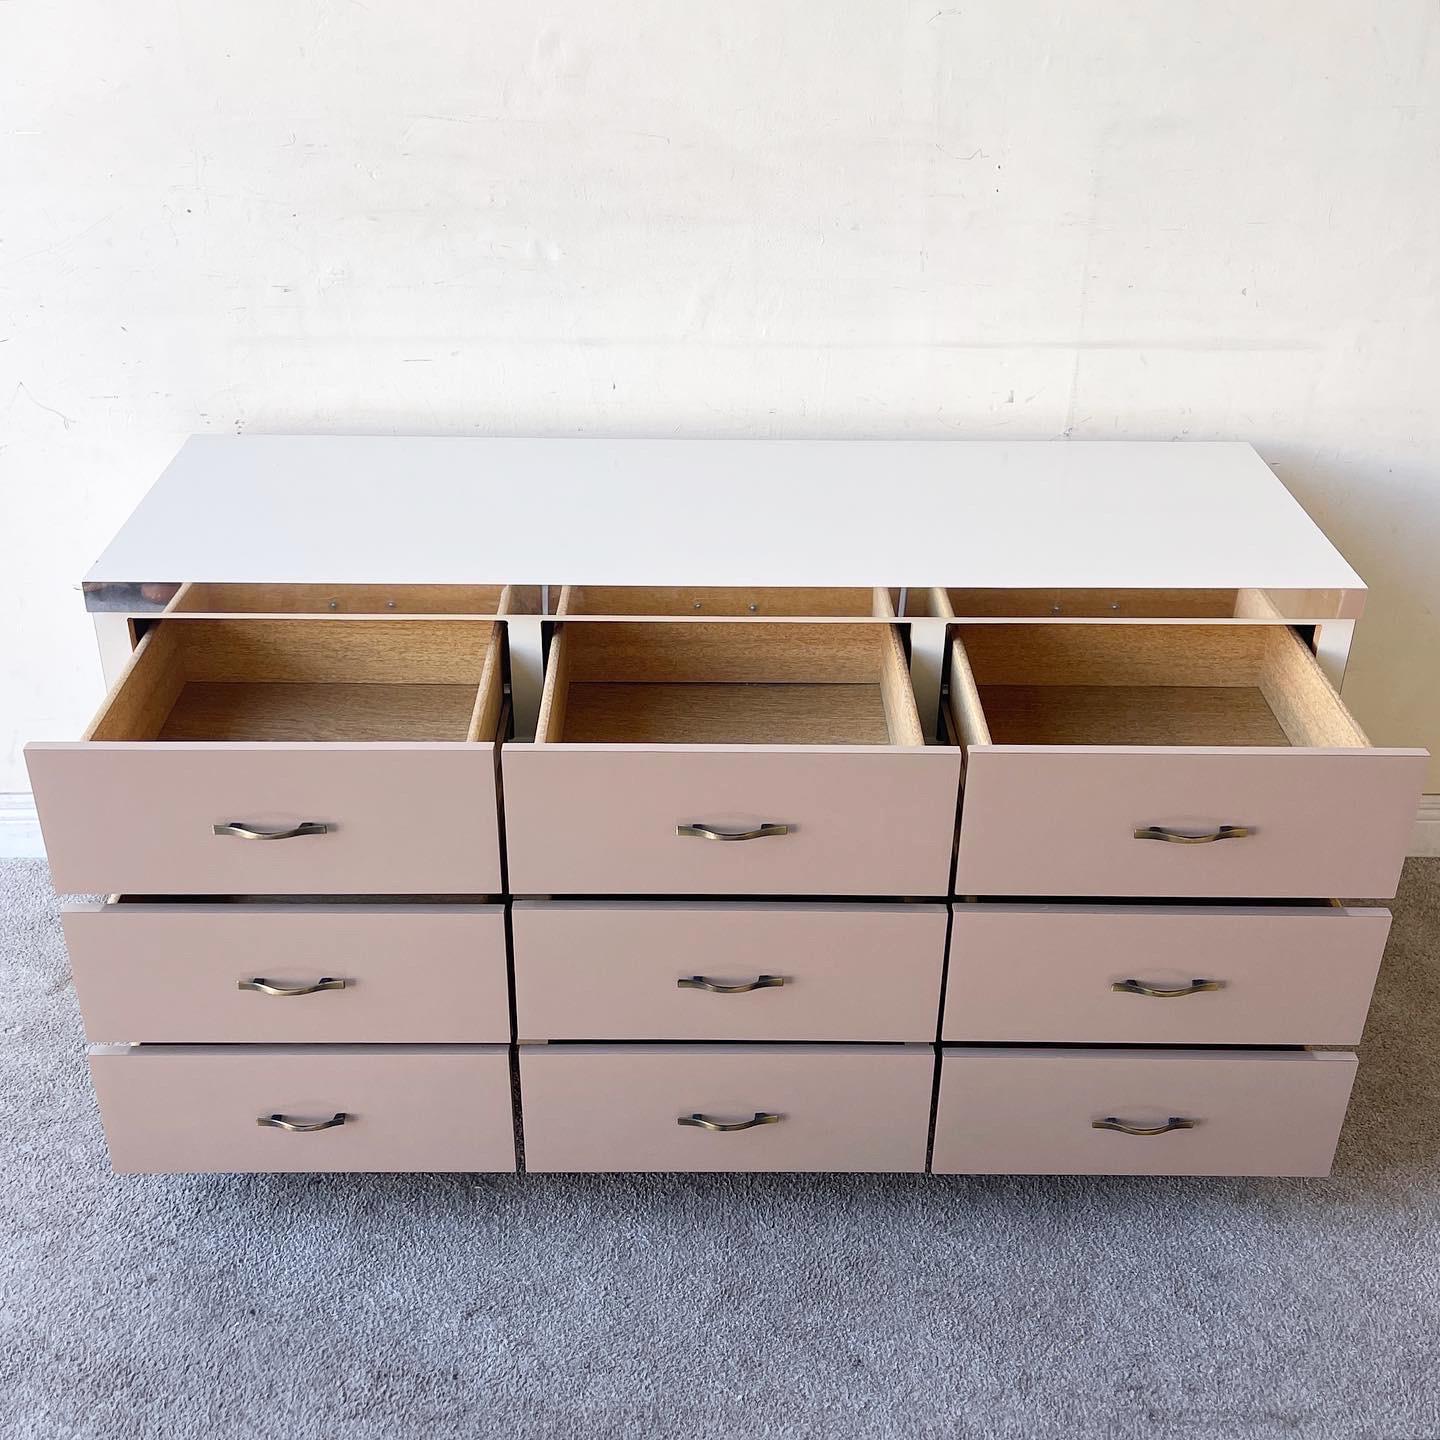 Amazing vintage postmodern triple dresser. Features a cream and taupe lacquer laminate with a chrome strip bordering the top.

Additional information:
Materials: Wood
Color: Cream, Taupe
Style: Postmodern
Time Period: 1980s
Place of Origin: